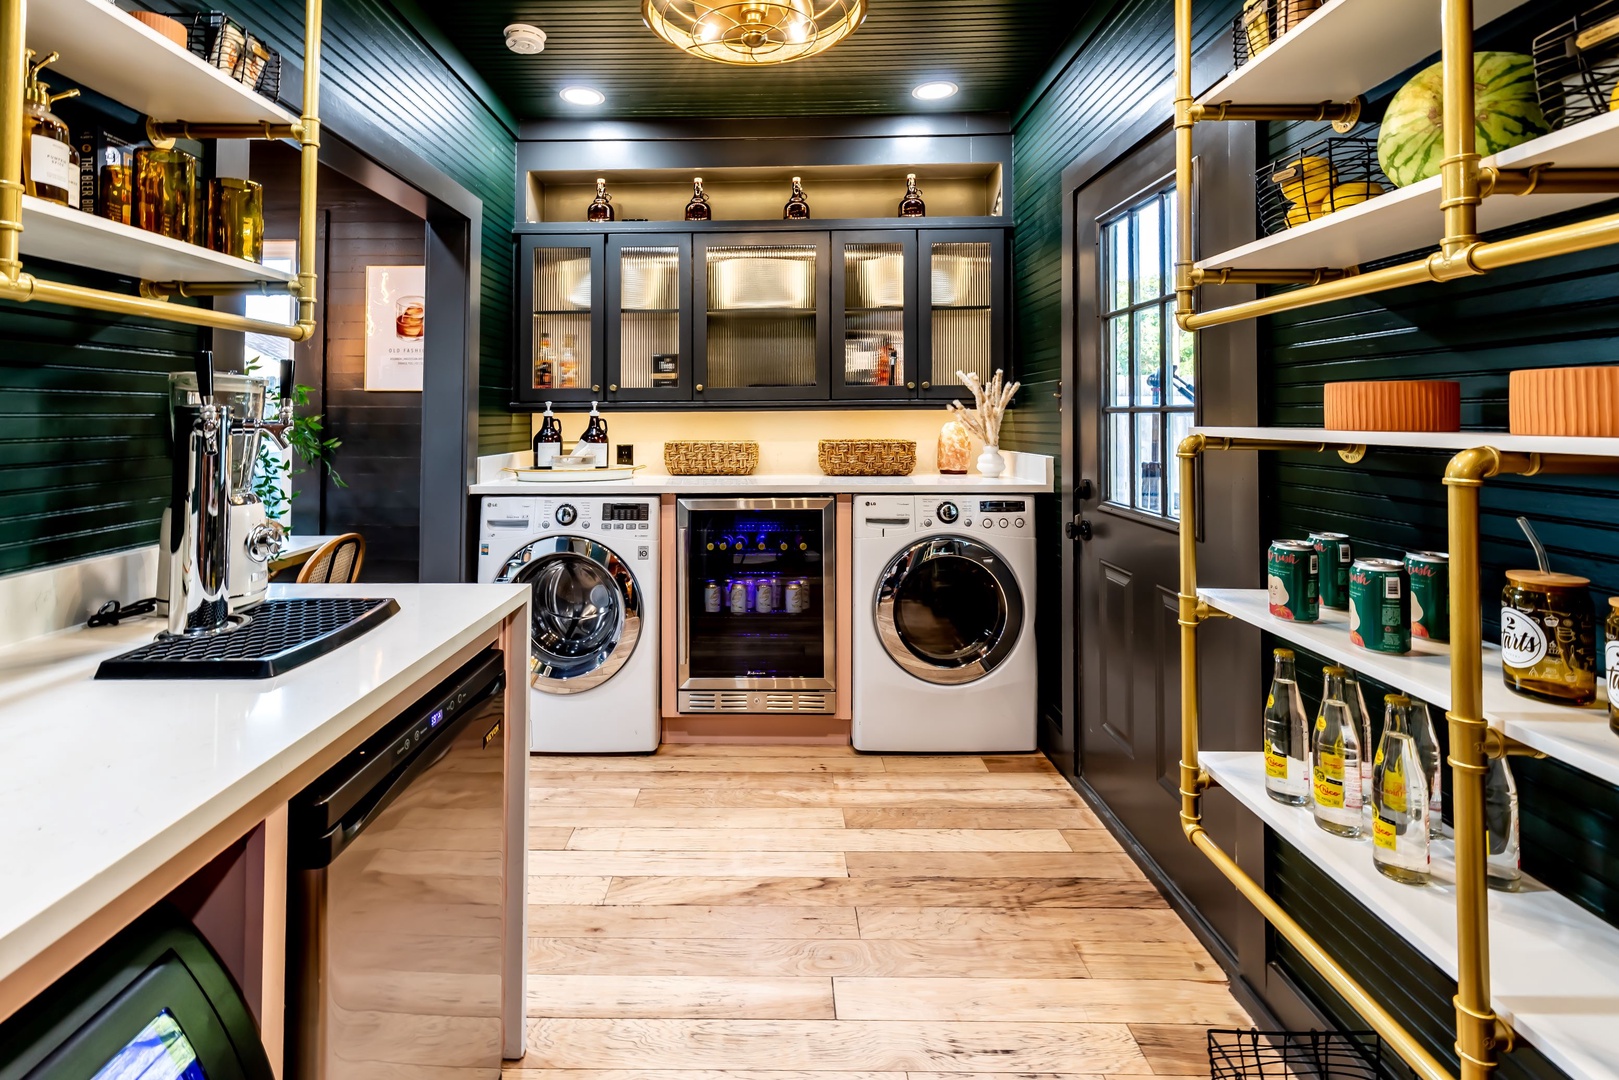 Private laundry is neatly tucked away in the pantry area